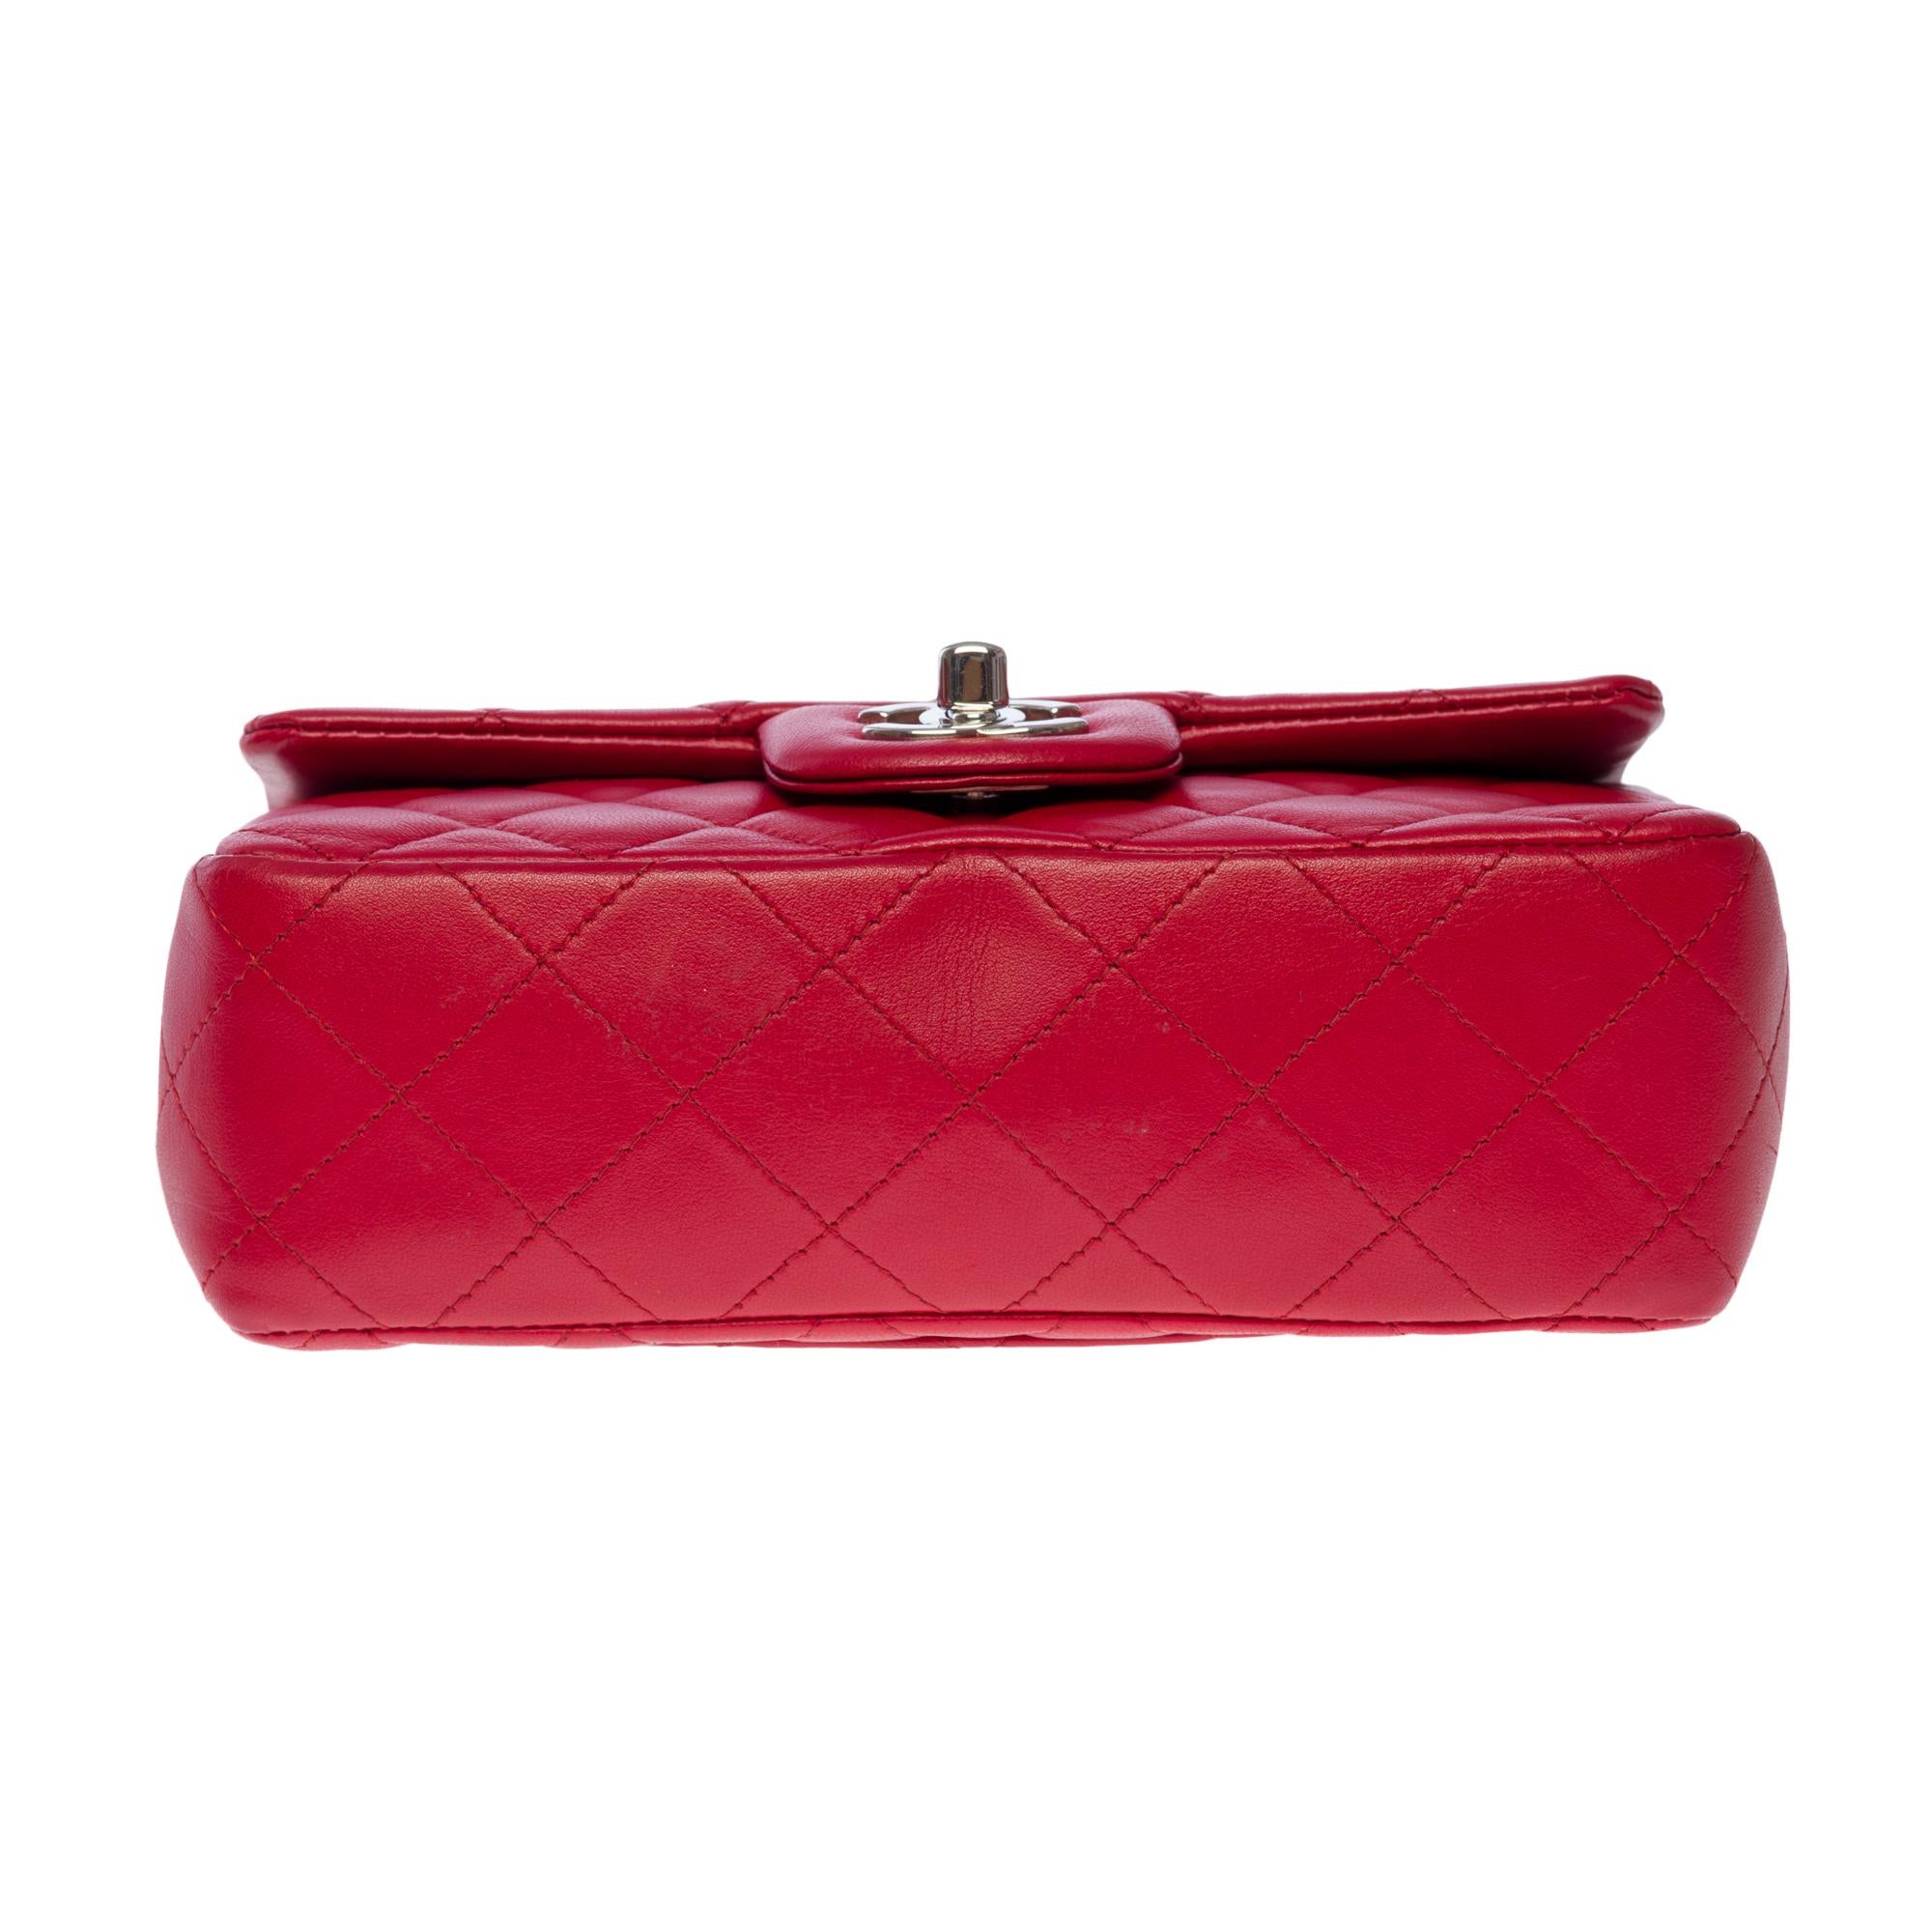 Stunning Chanel Timeless Mini Flap shoulder bag in Red quilted lamb leather, SHW 7